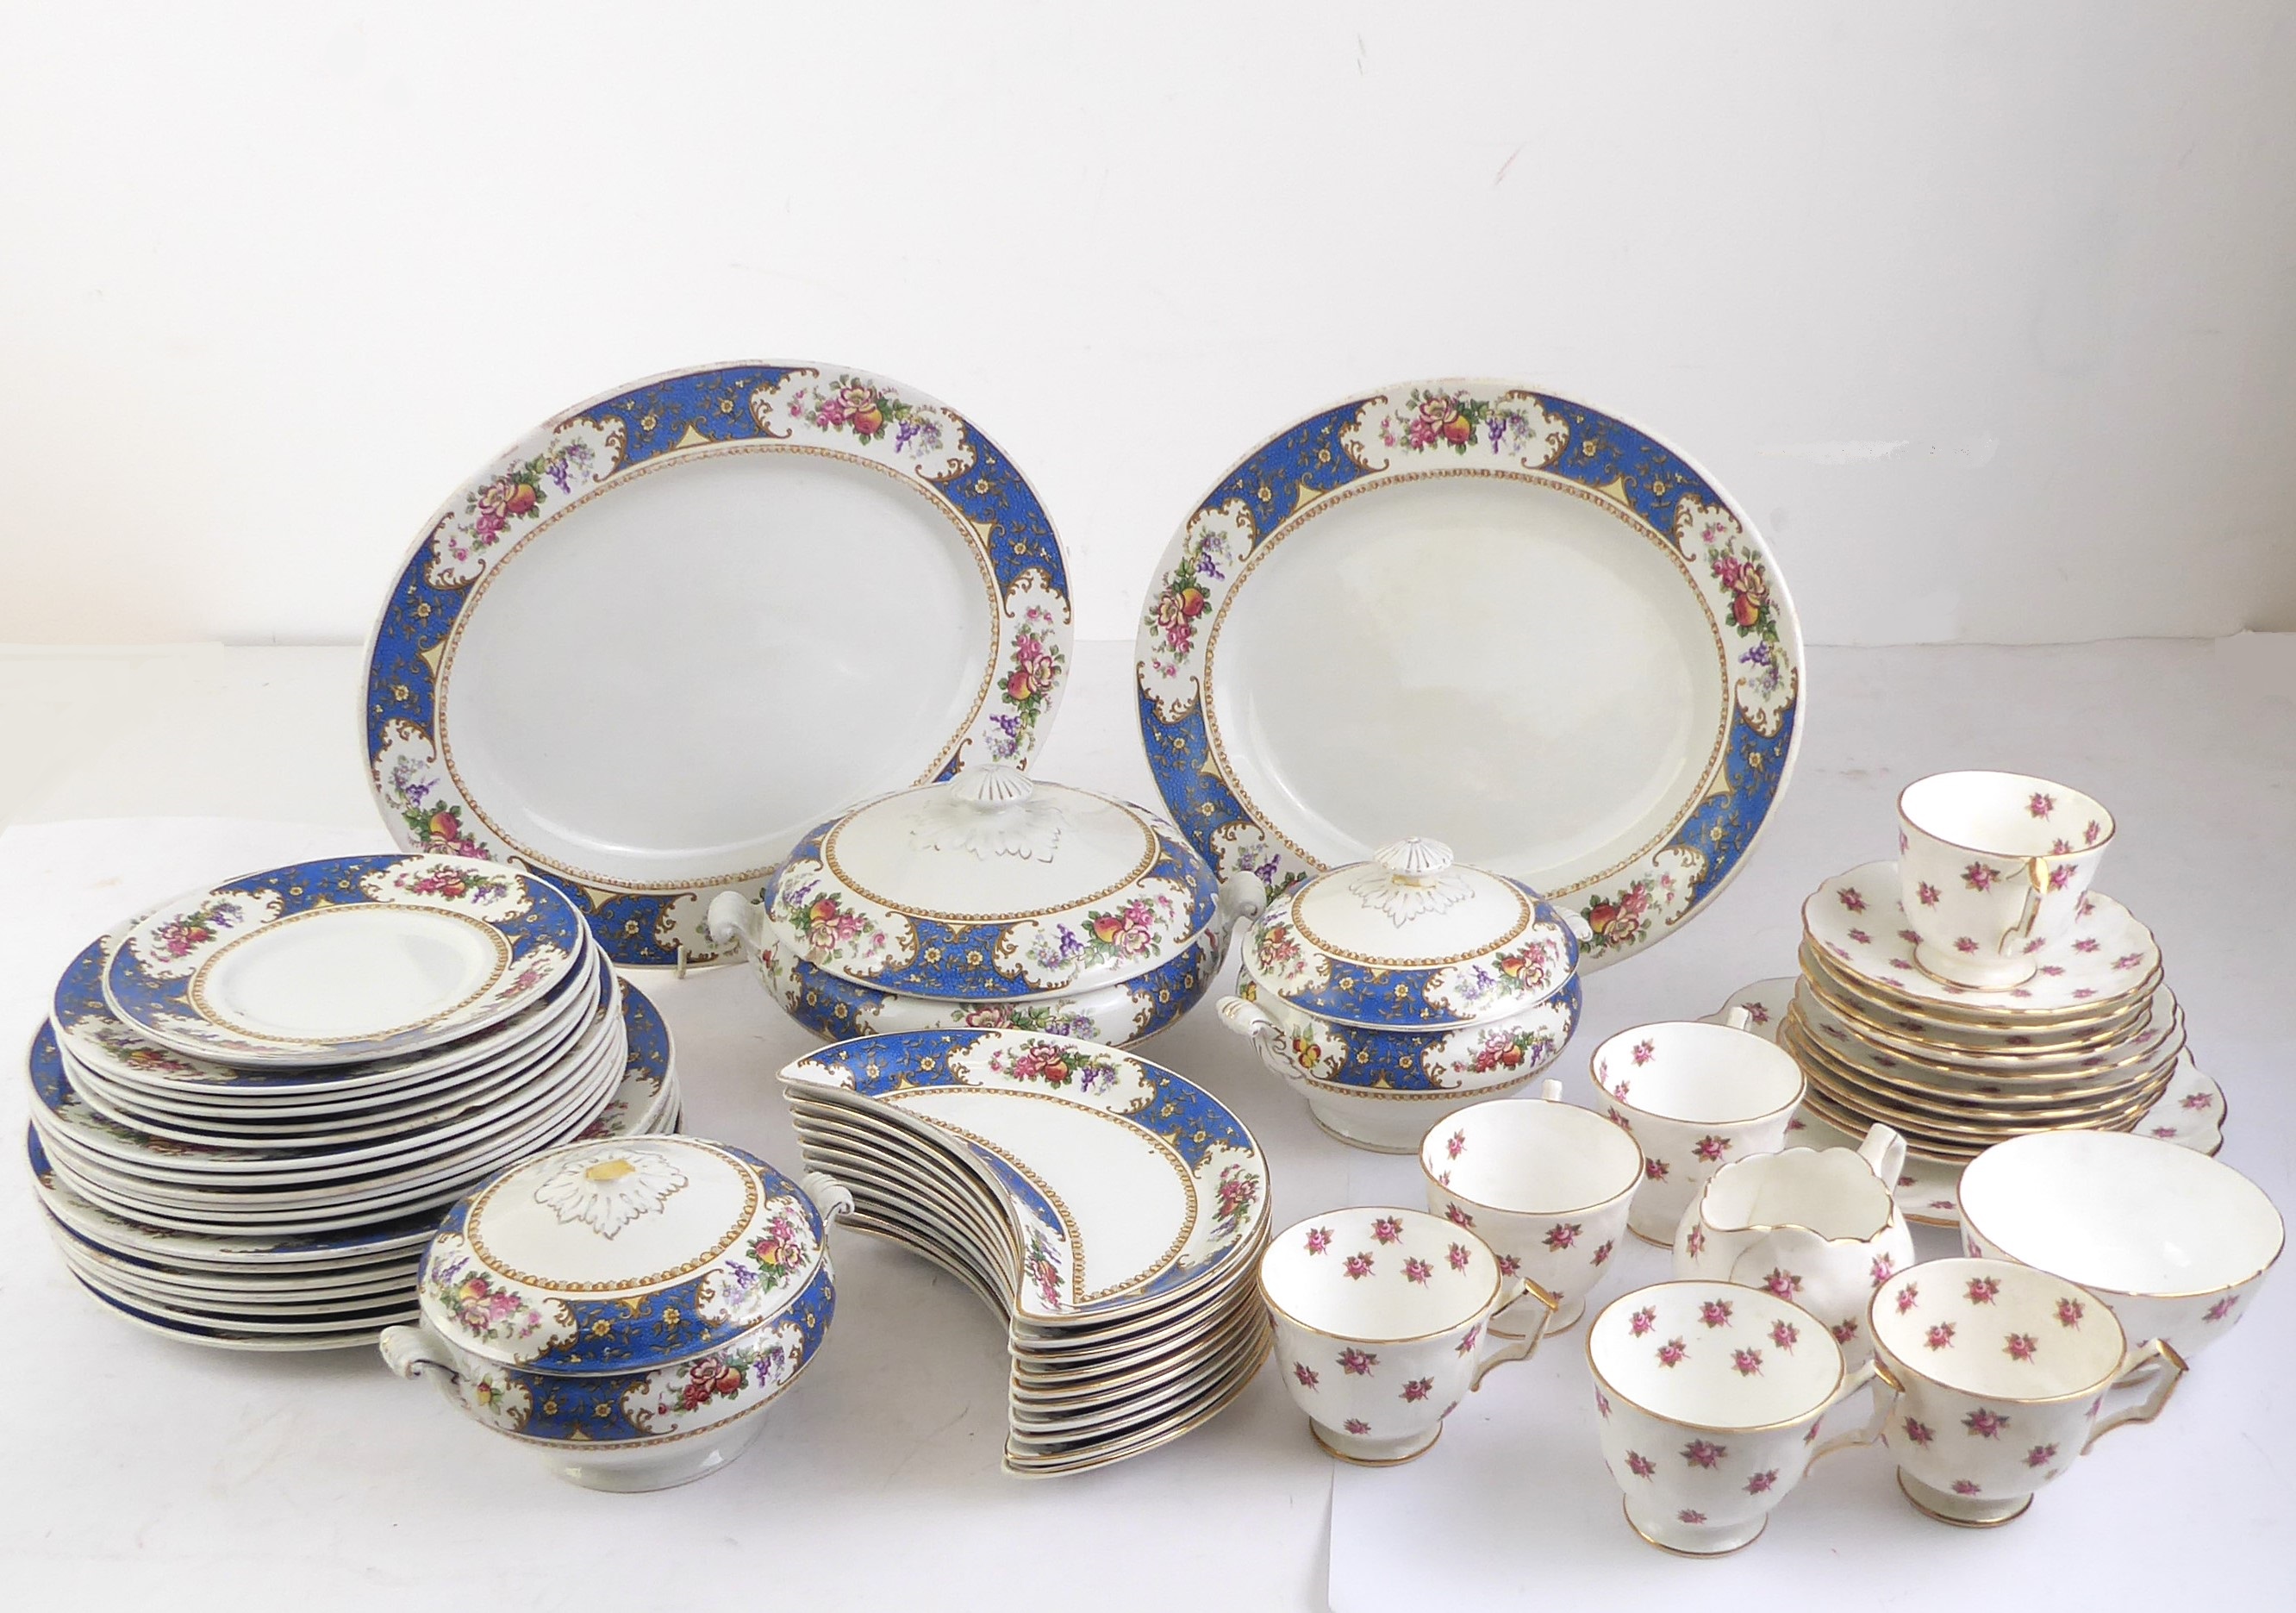 An Aynsley bone china part-tea service decorated with pink roses - green printed factory marks,